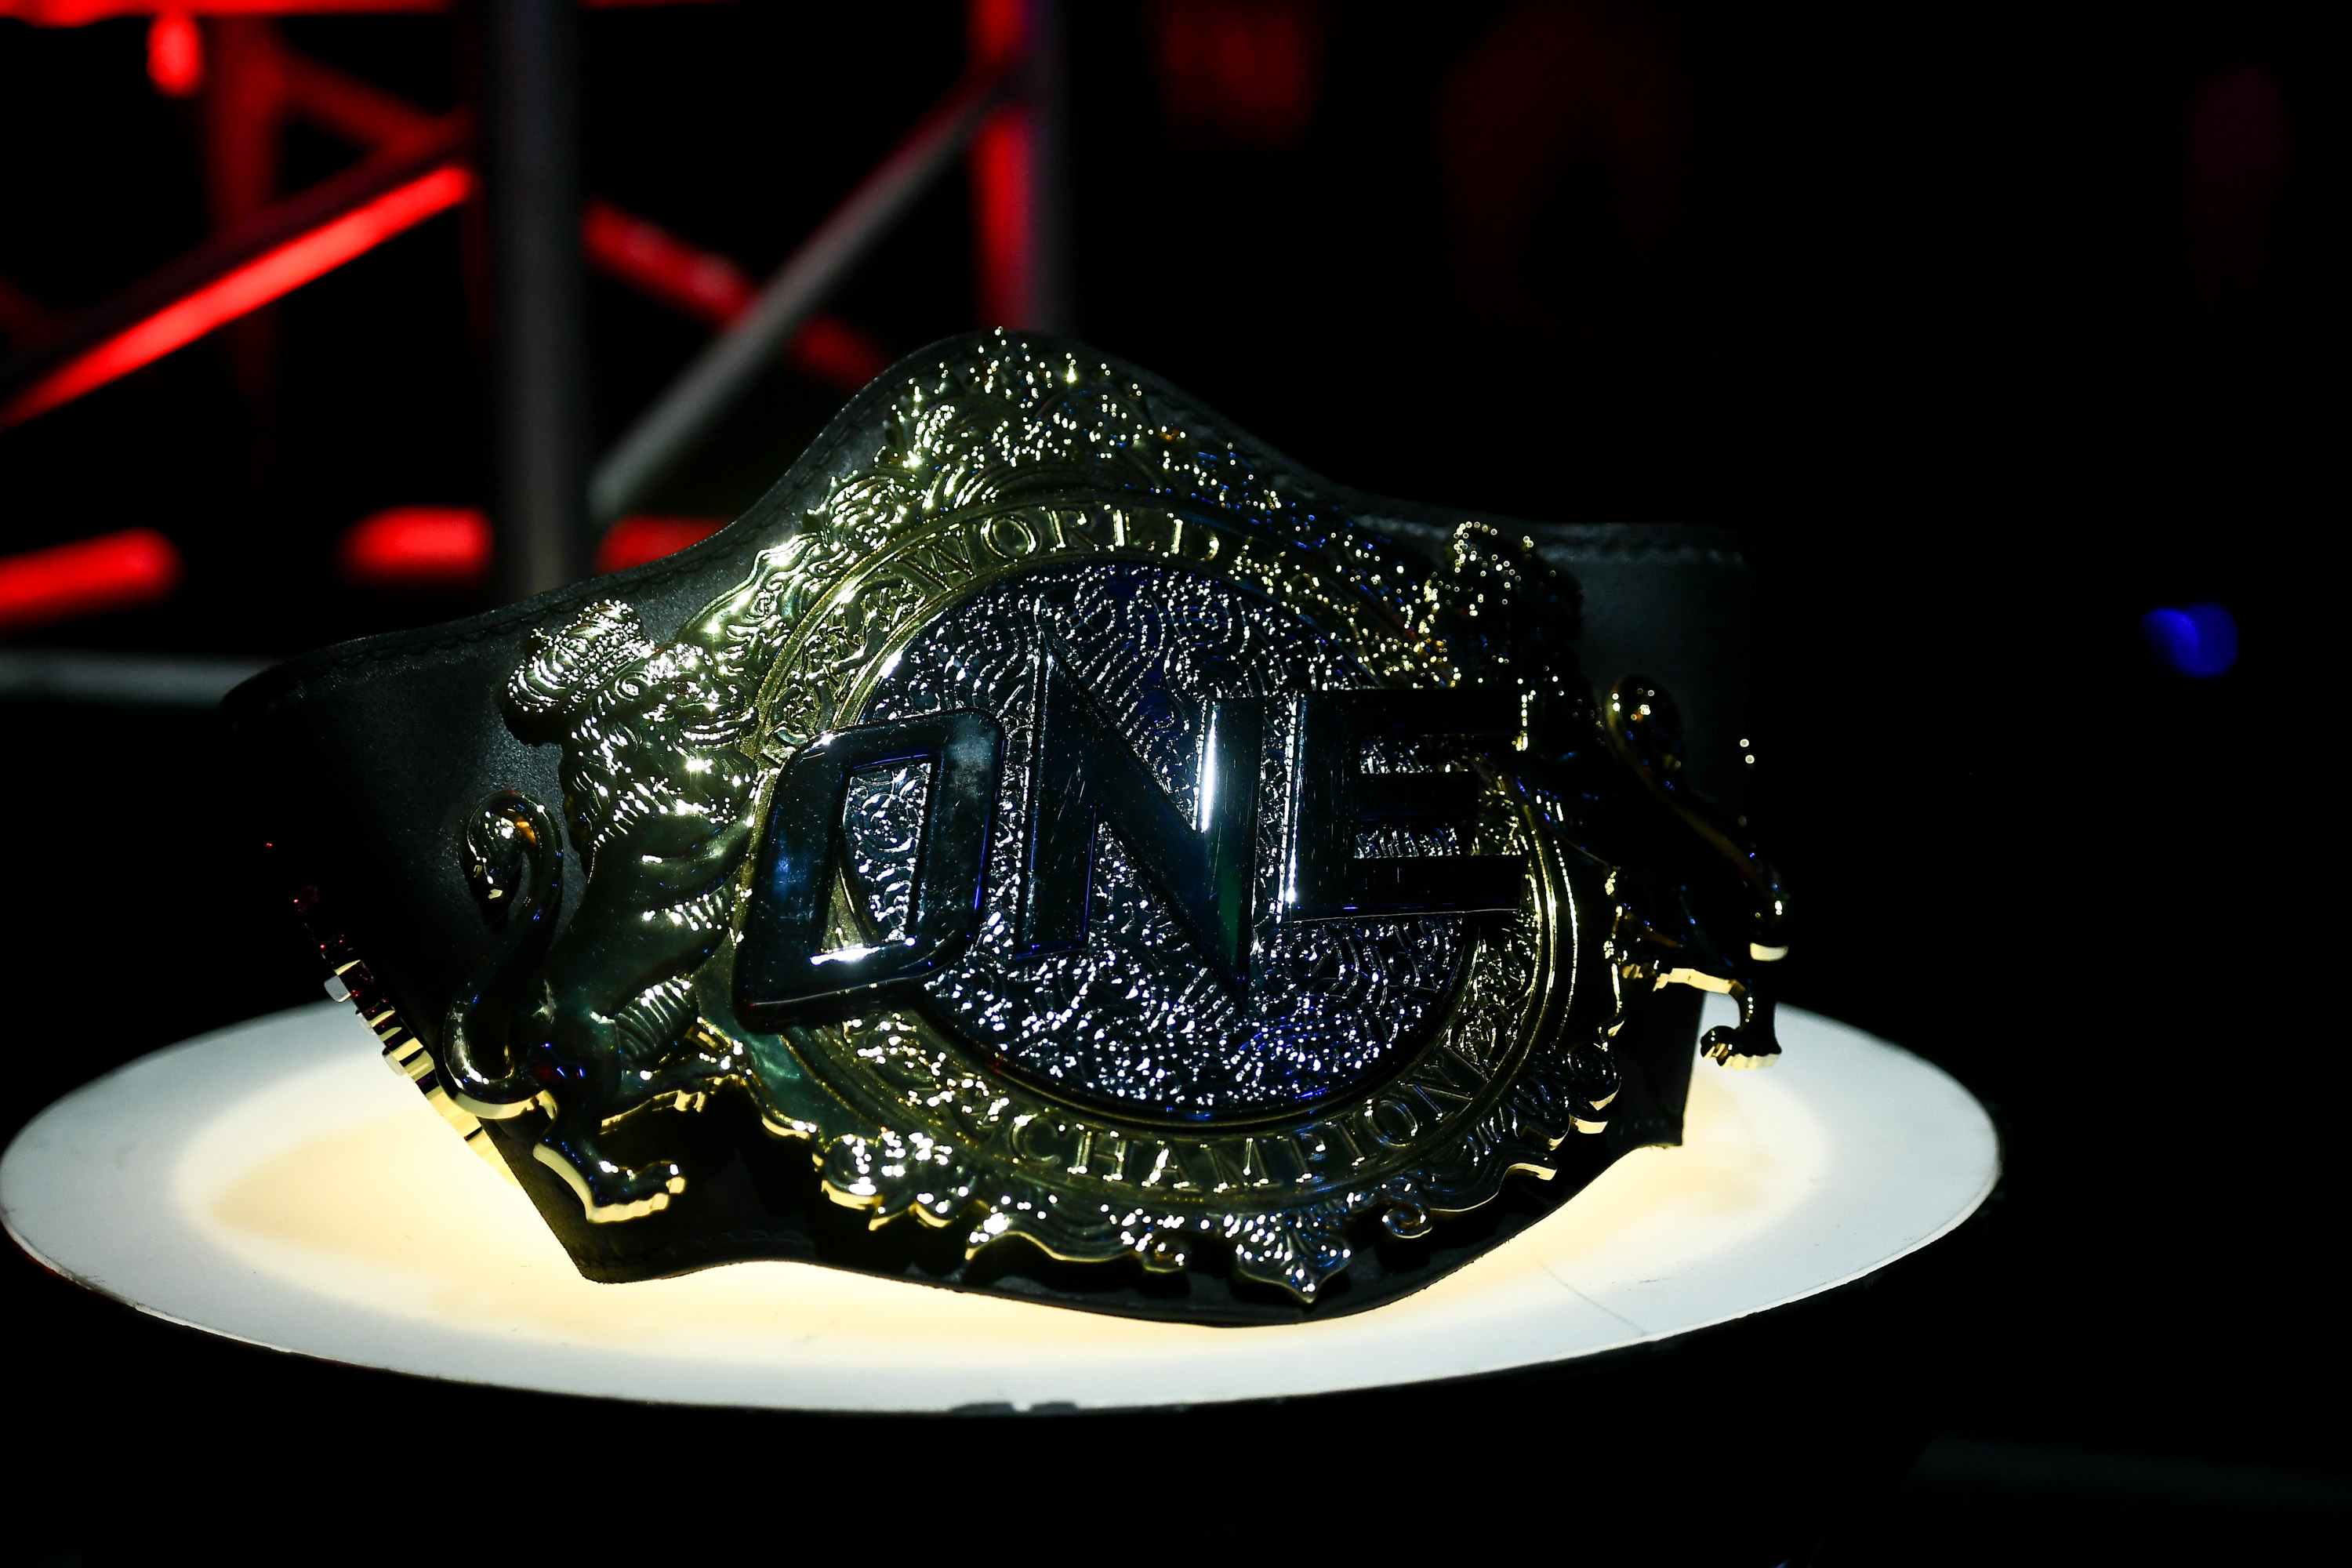 ONE Championship: ONE Warrior Series 4 - ONE Championship – The